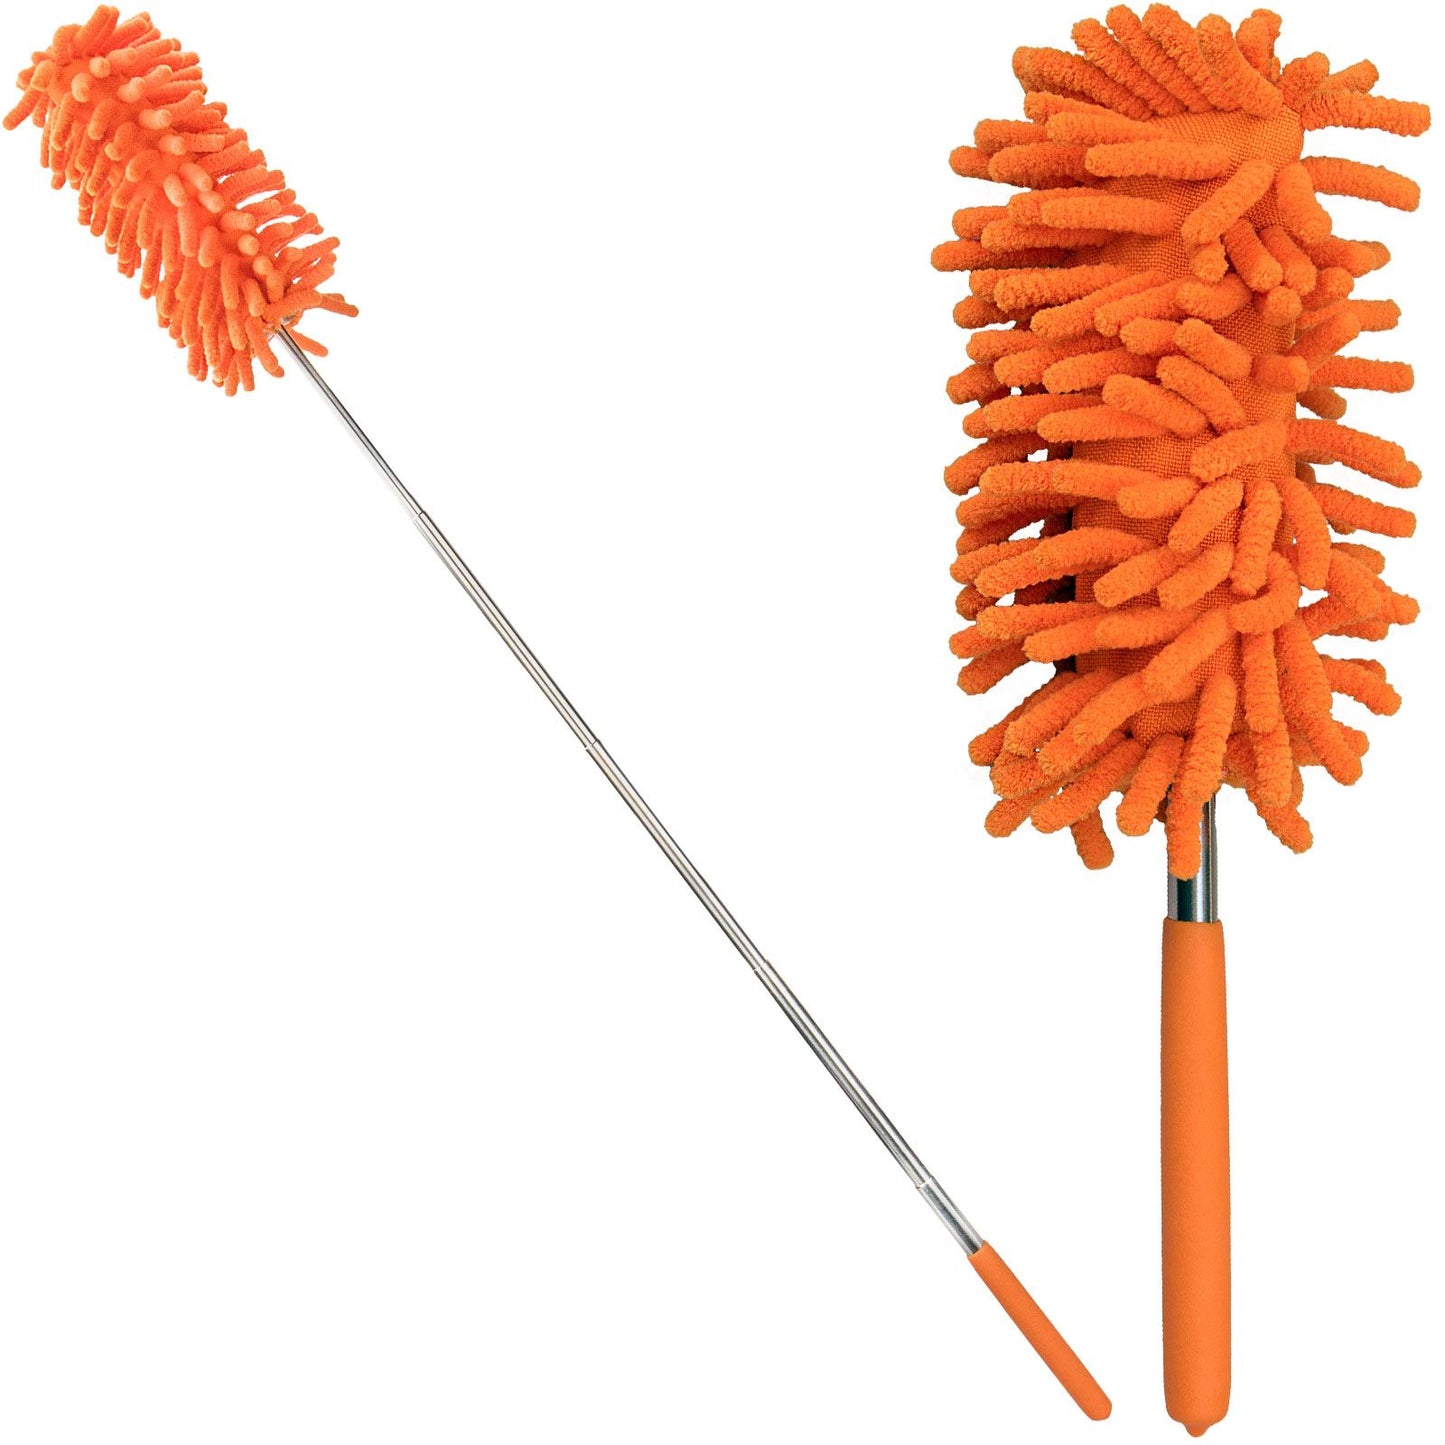 Extendable Microfiber Duster for Cleaning Hard-to-Reach Places